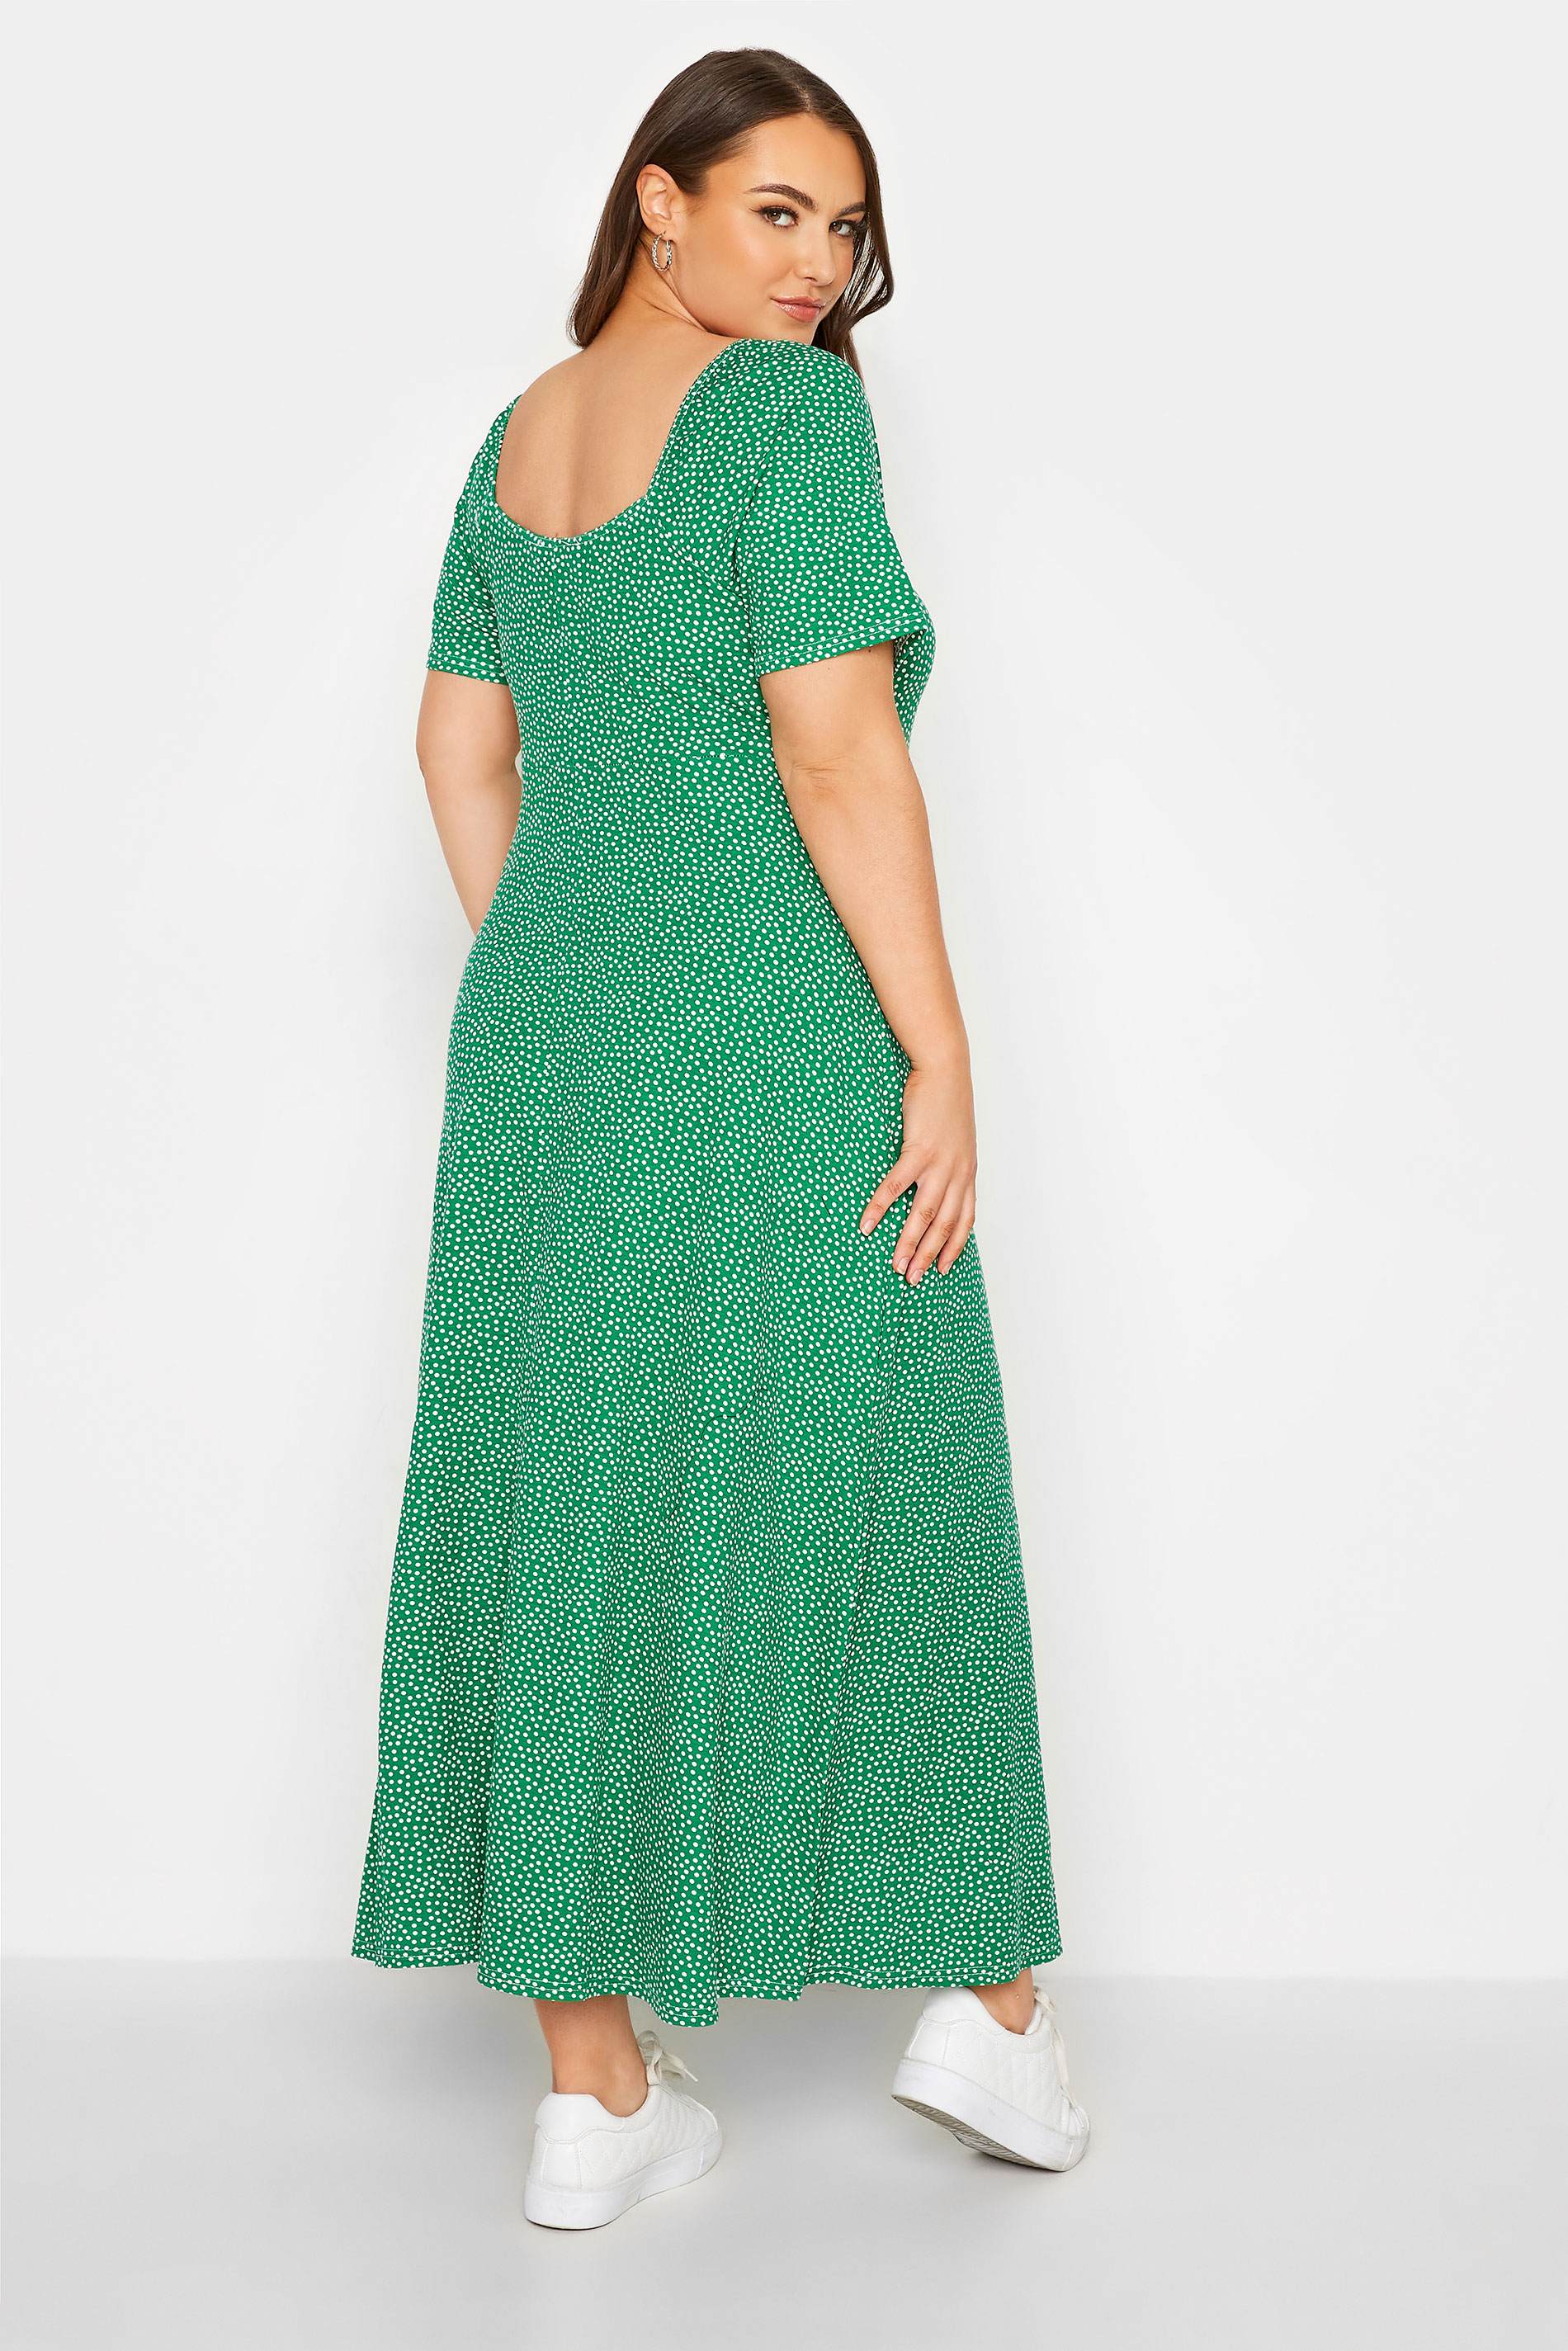 LIMITED COLLECTION Plus Size Green Spot Print Maxi Dress | Yours Clothing 3